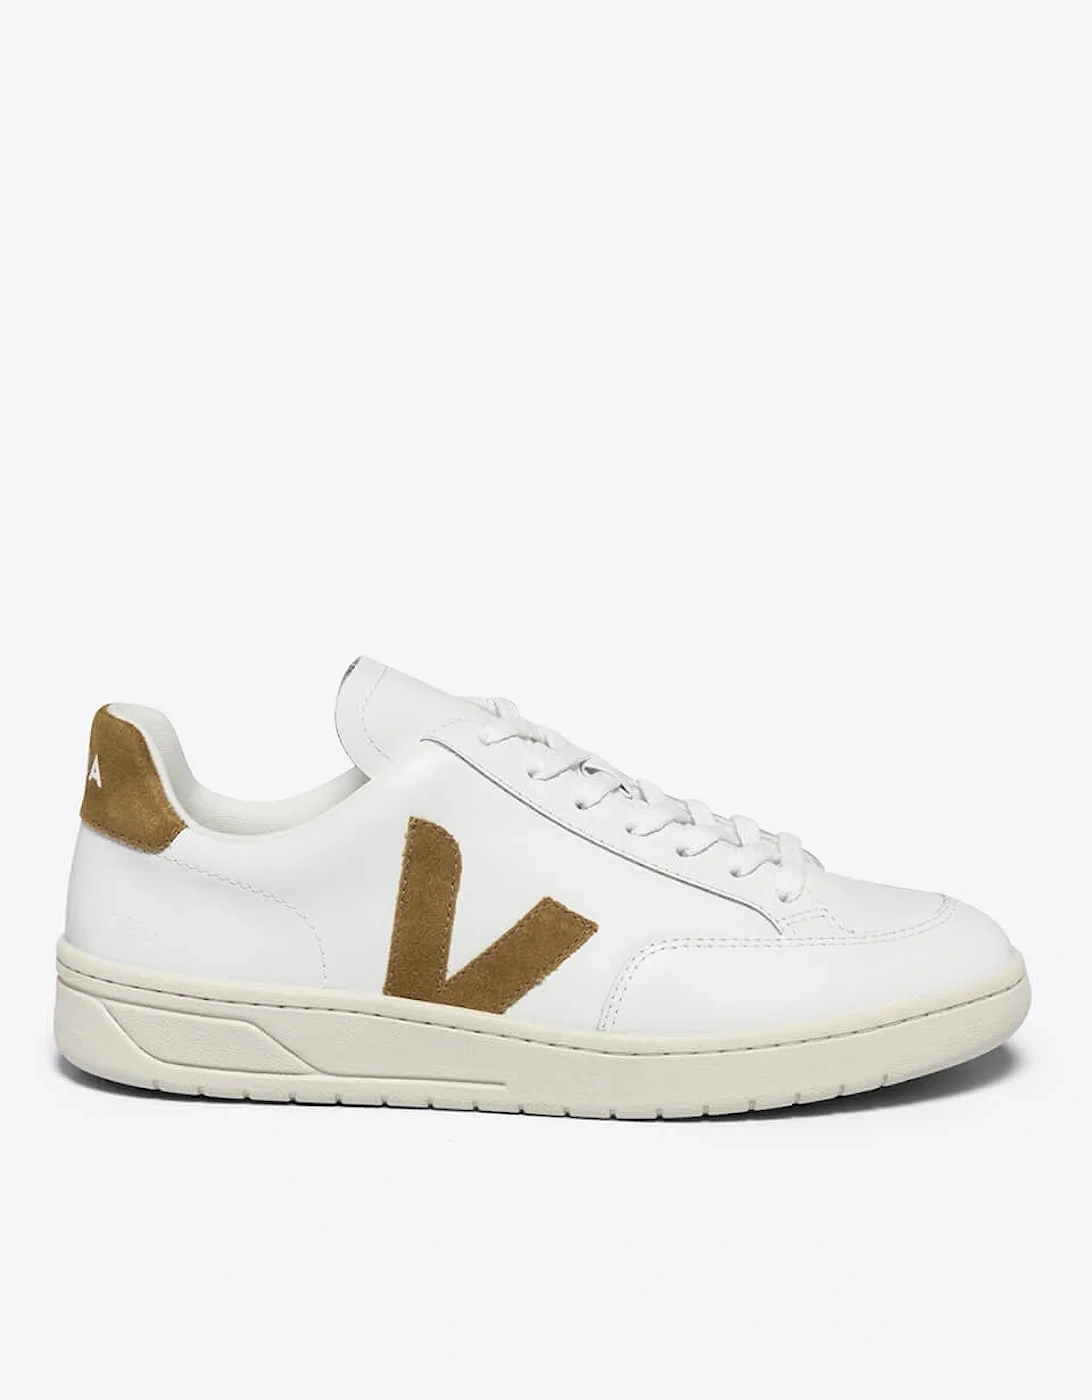 Women's V-12 Logo-Appliquéd Leather and Suede Trainers - - Home - Women's Shoes - Women's Low Top Trainers - Women's V-12 Logo-Appliquéd Leather and Suede Trainers, 2 of 1